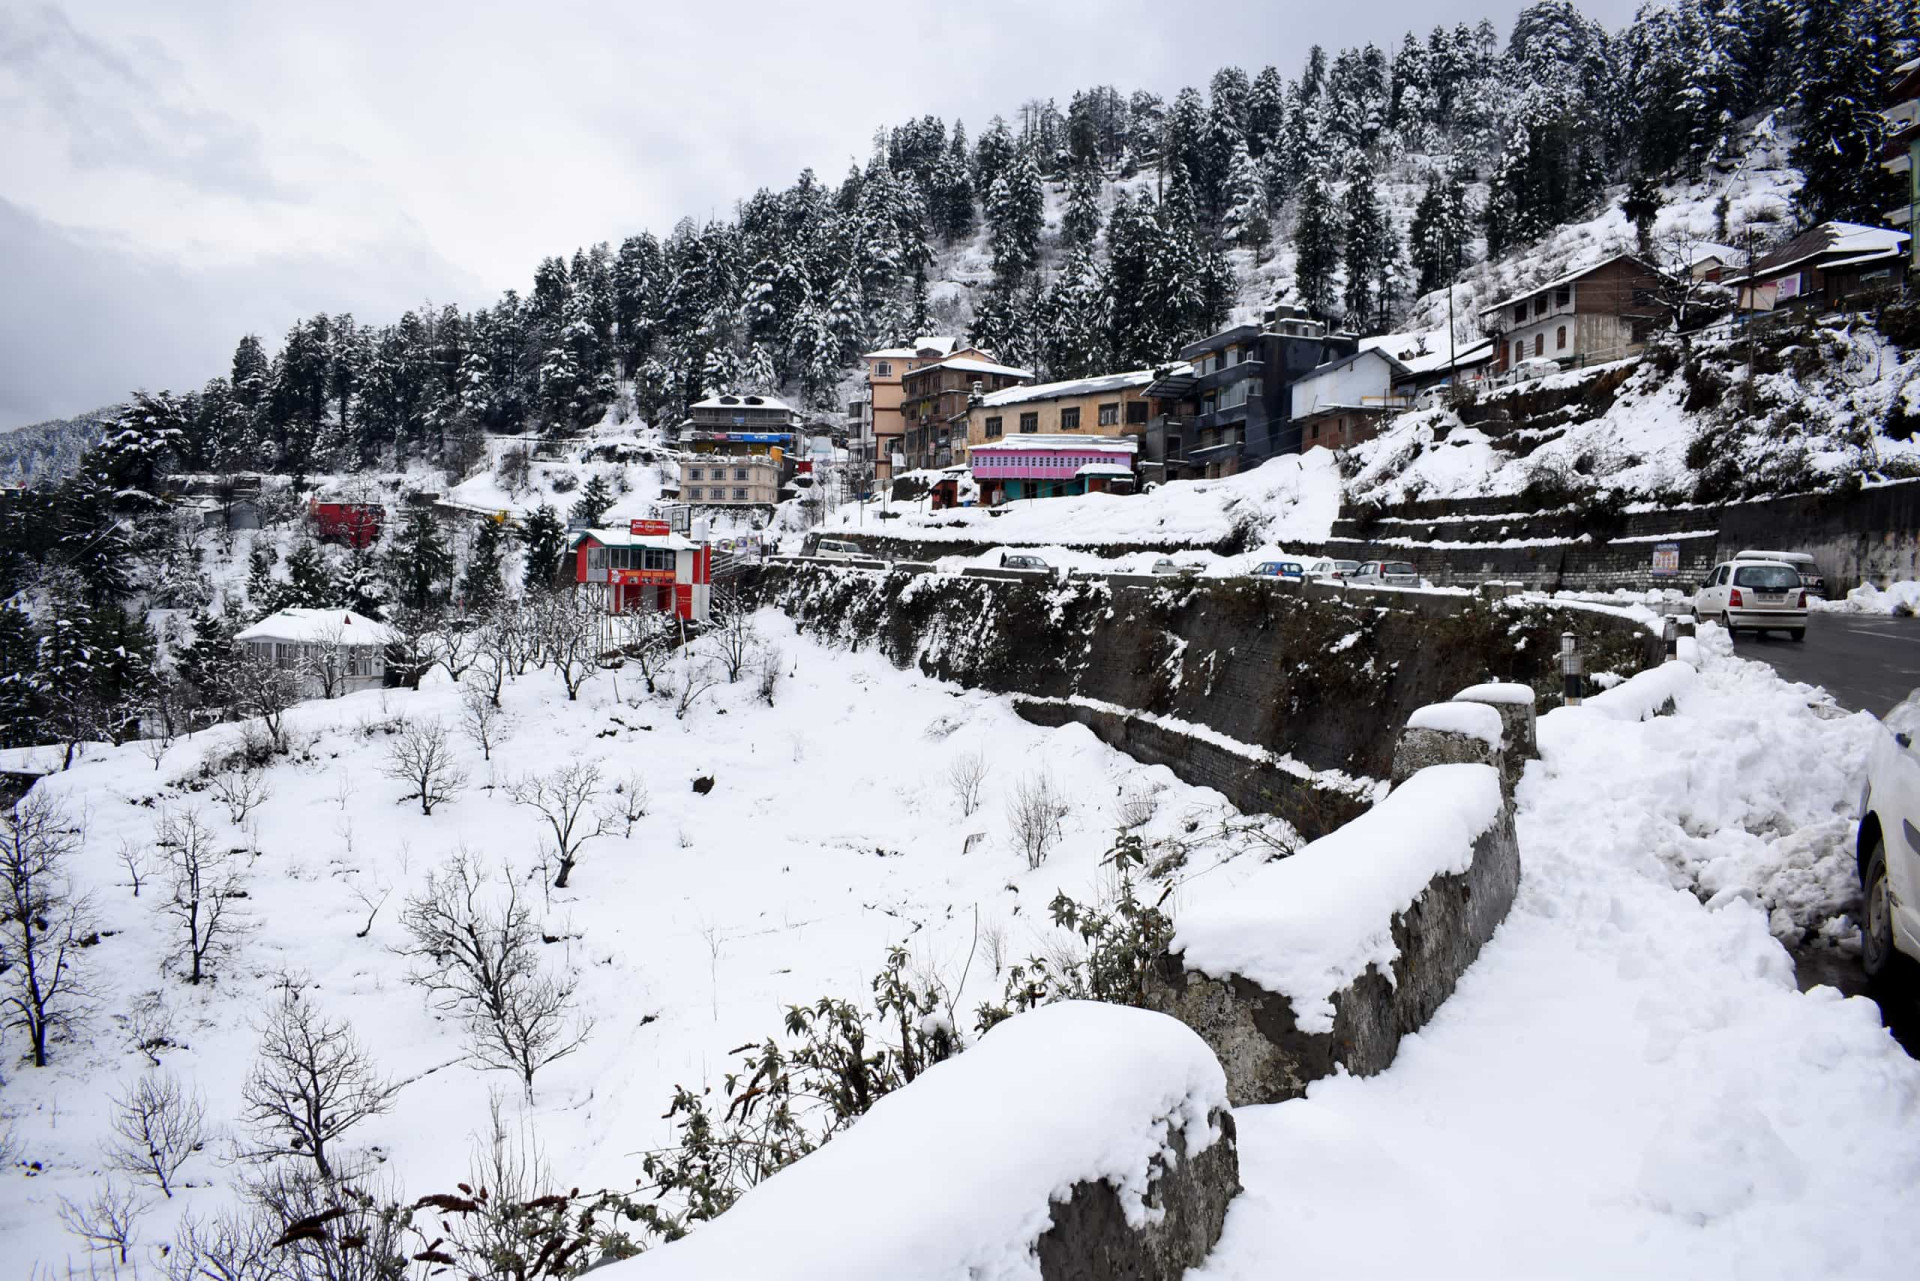 <p>Kufri, a hill station in the district of Shimla, is suitably set on the highest point in the state of Himachal Pradesh. A skier's paradise, Kufri also woos wildlife enthusiasts with its Himalaya wildlife zoo, home to the exotic Himalayan monal, the national bird of Nepal, among other species.</p><p>You may also like:<a href="https://www.starsinsider.com/n/428063?utm_source=msn.com&utm_medium=display&utm_campaign=referral_description&utm_content=470081v2en-en"> The worst crime committed the year you were born</a></p>